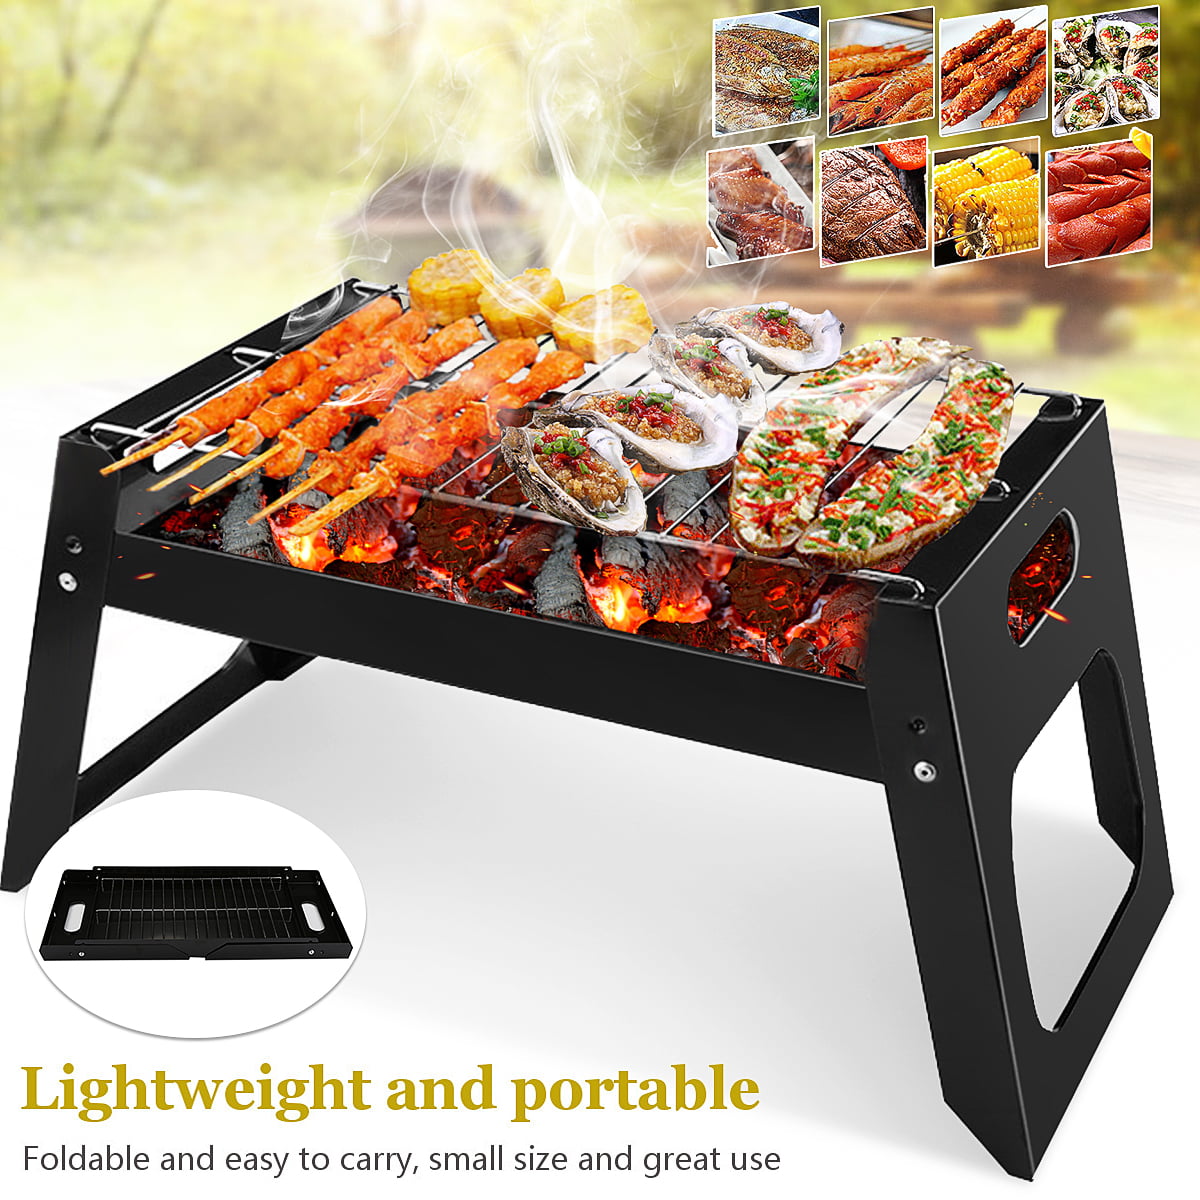 BBQ Gas Stove Portable Mini Camping Lighter Outdoor Barbecue Grill Stoves Tool 